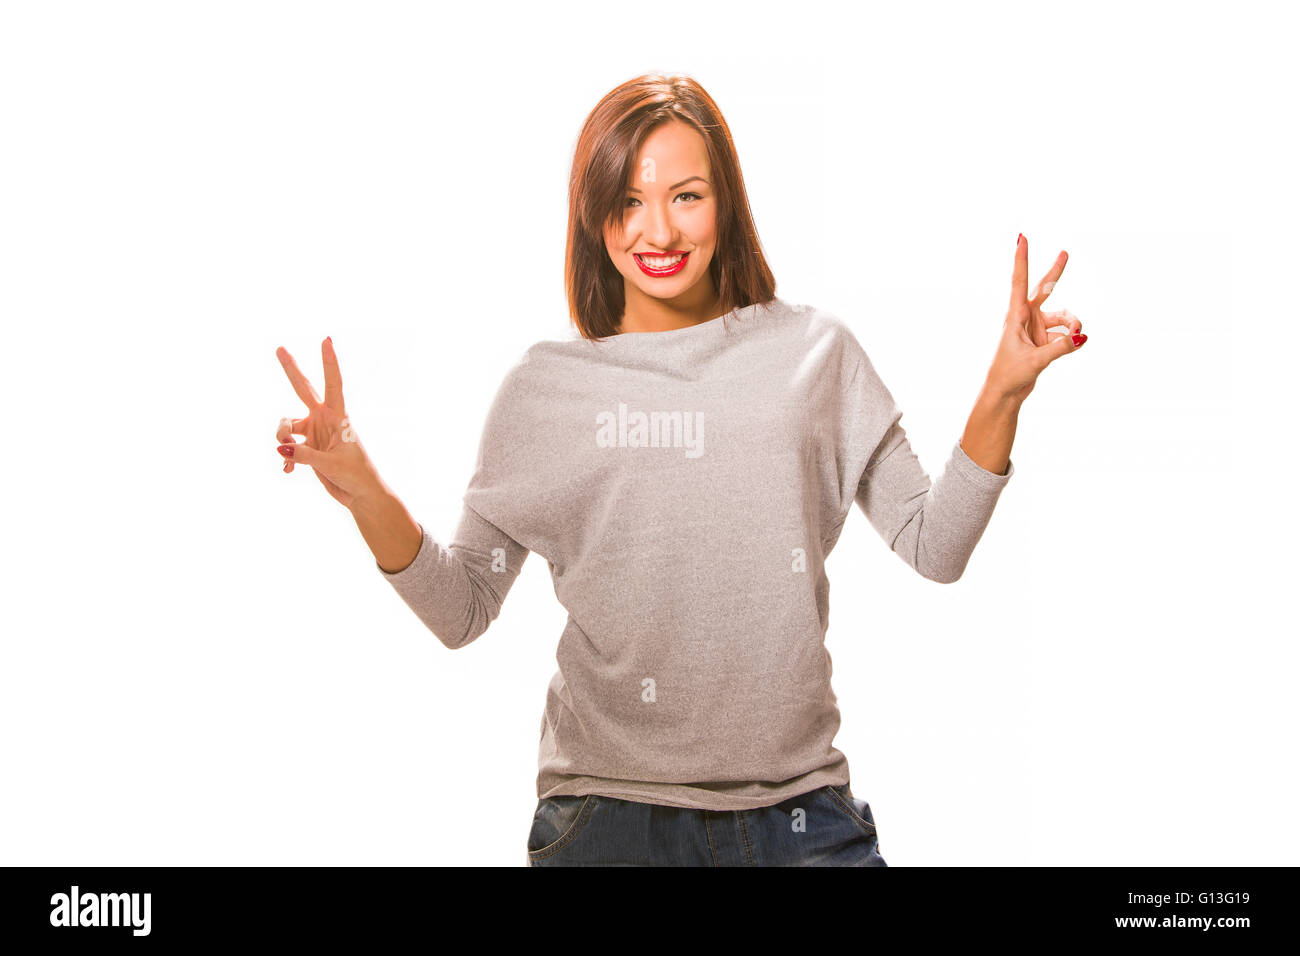 Beautiful happy young woman standing with hands up, wearing jeans and grey blouse. Stock Photo